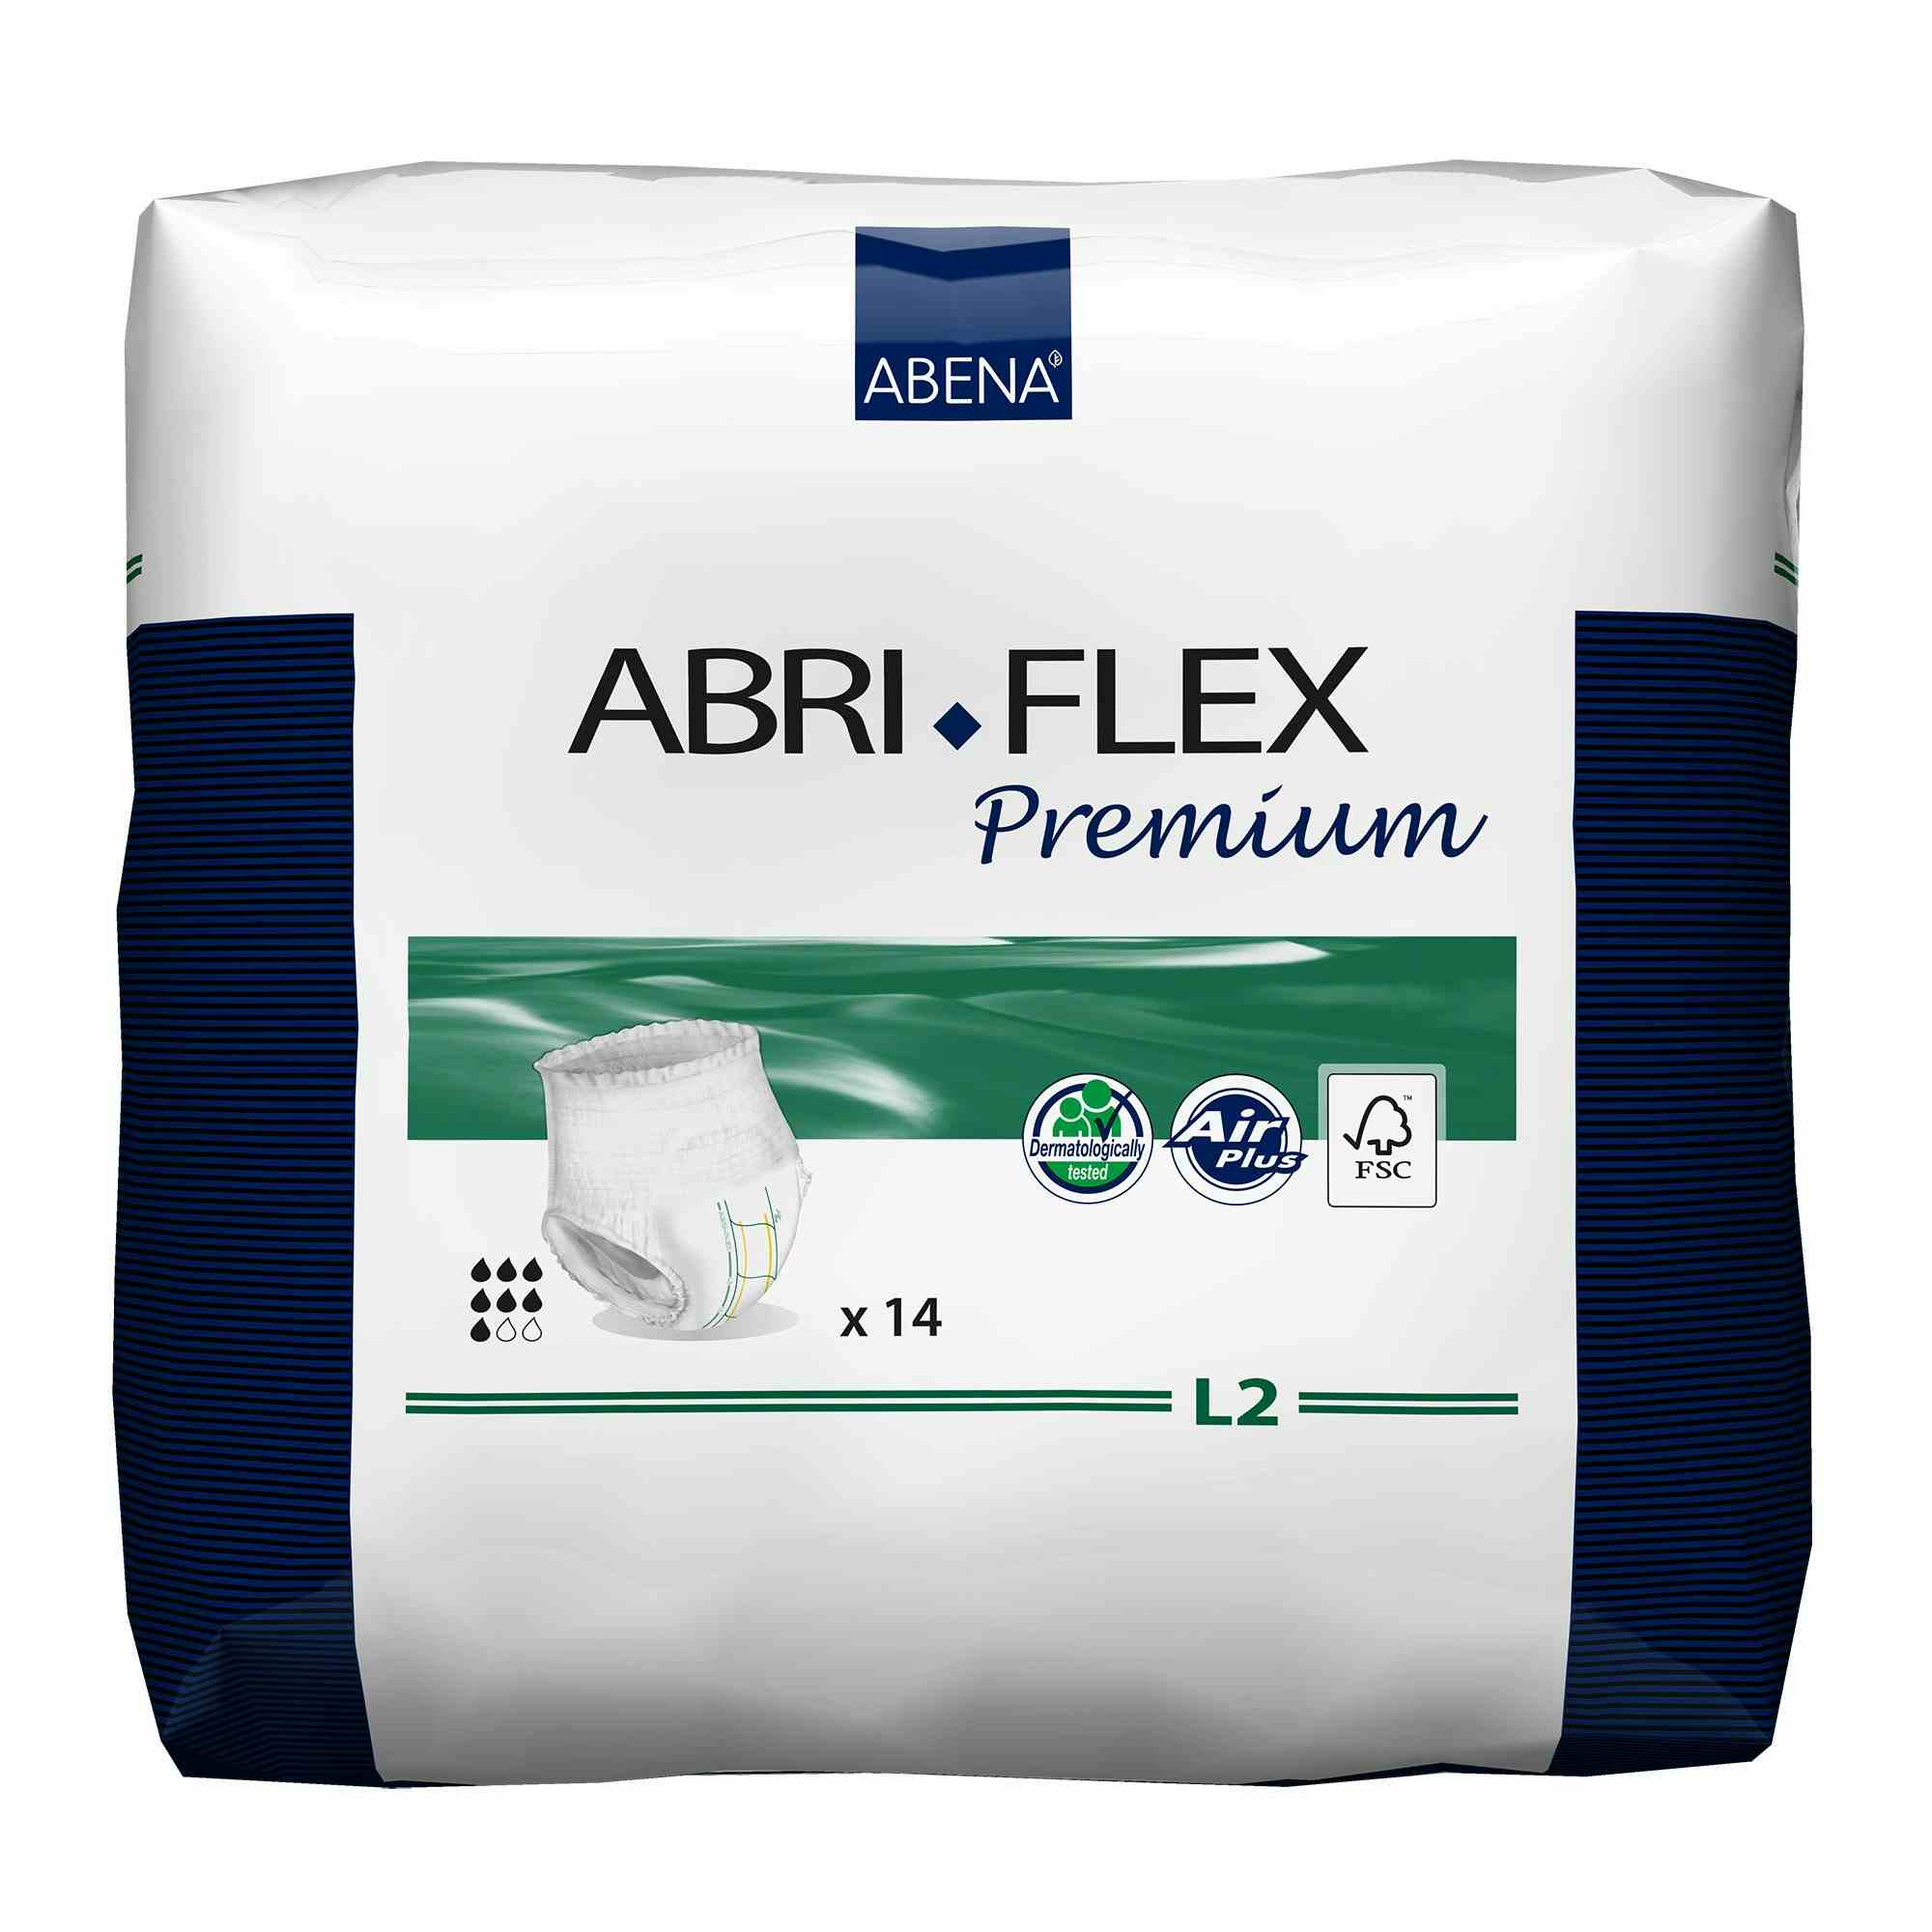 Abri-Flex Premium L2 Unisex Adult Disposable Pull On Diaper with Tear Away Seams, Heavy Absorbency, 41087, Large (40-56") - Case of 84 Diapers (6 Bags)